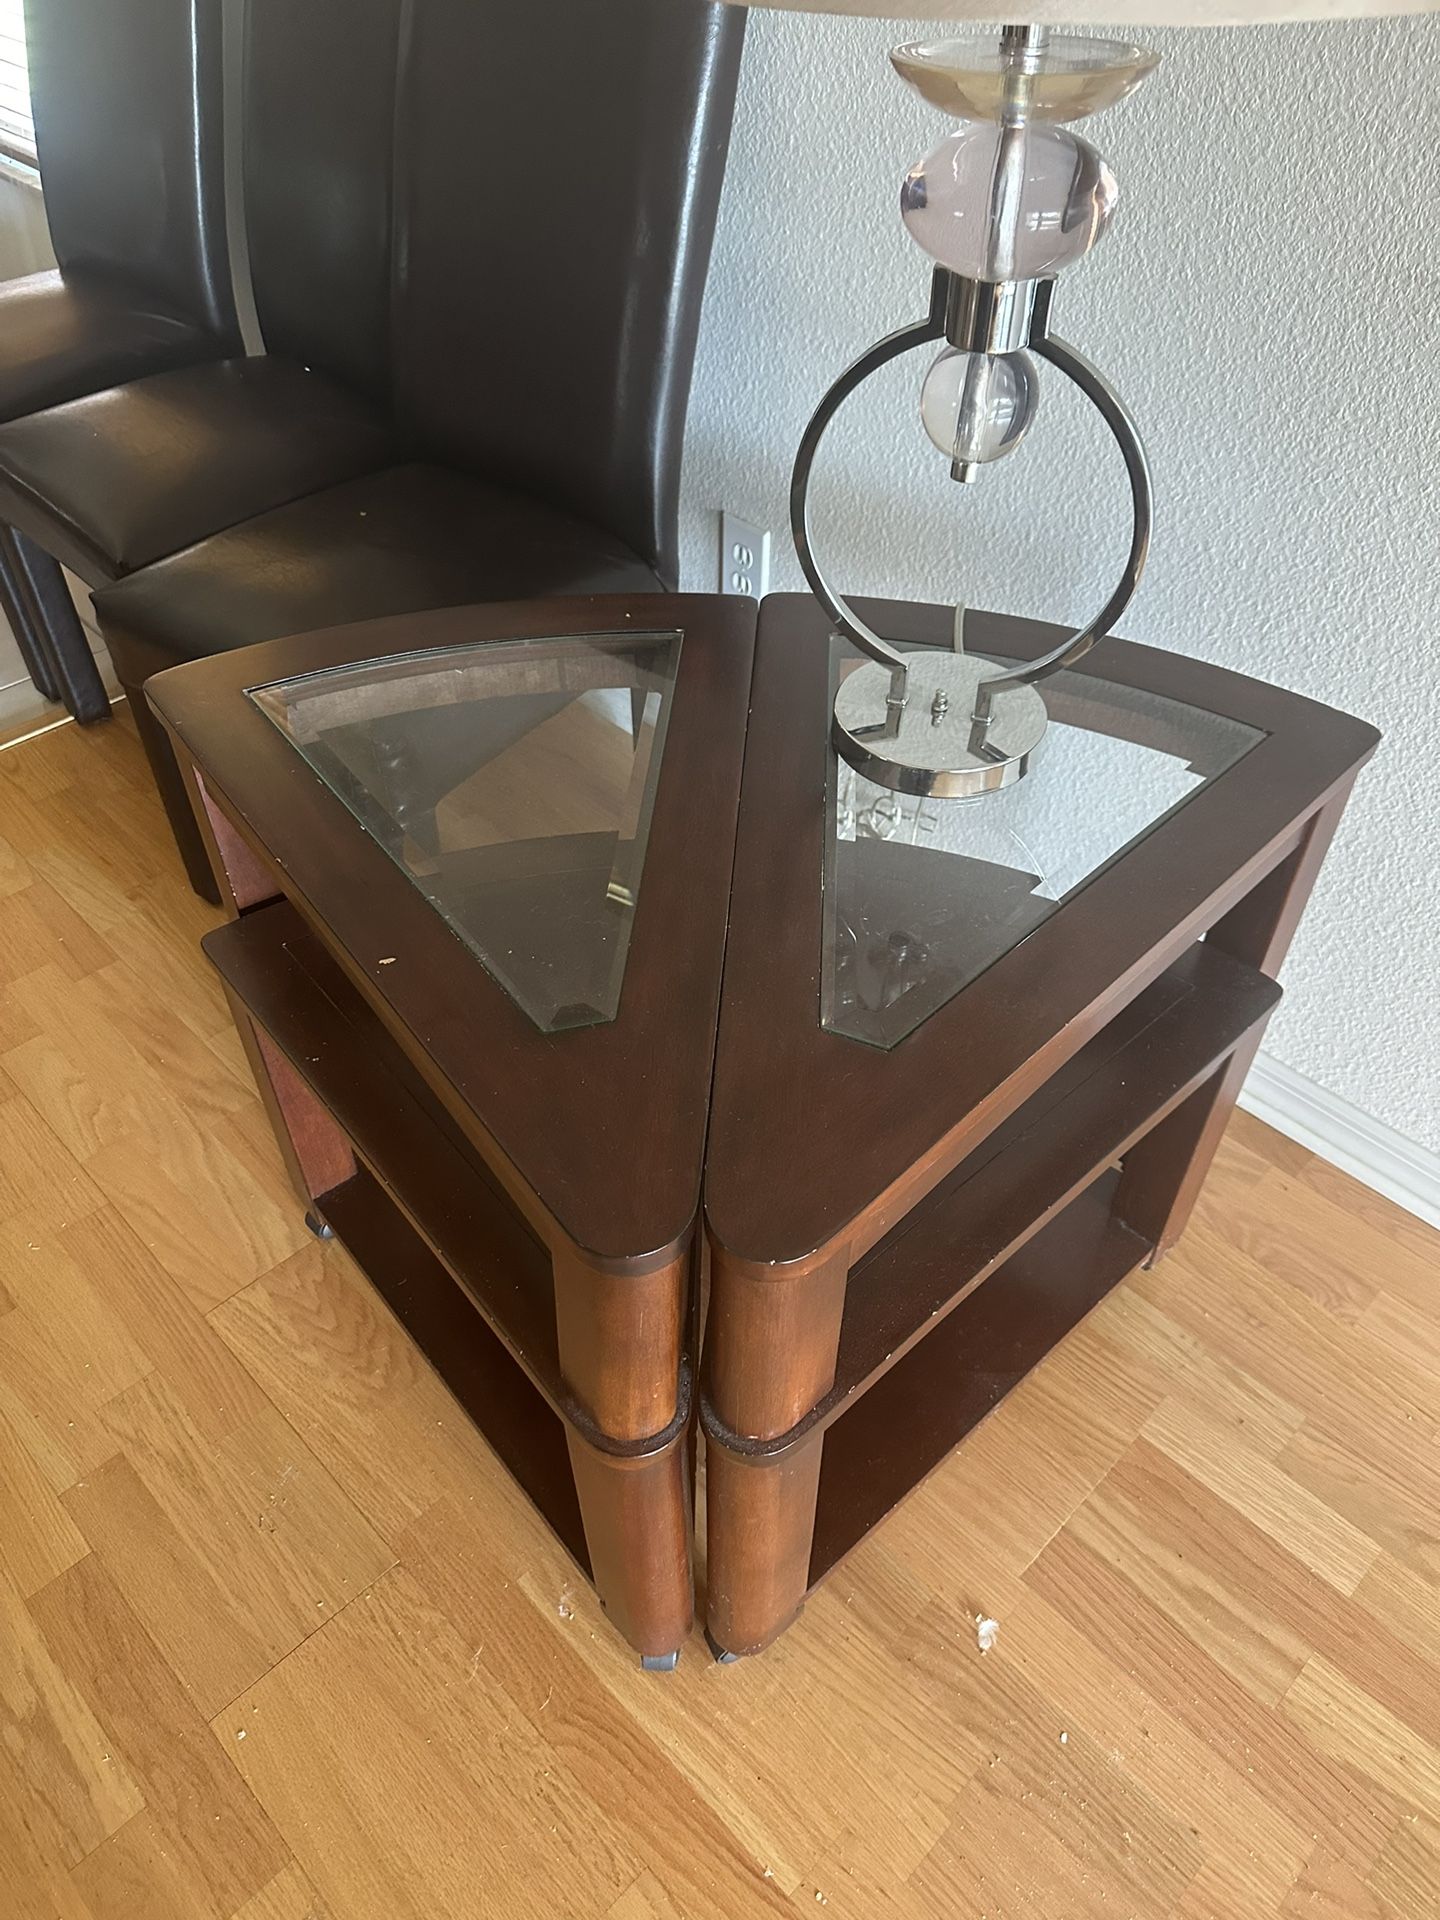 2 Swivel End Tables 